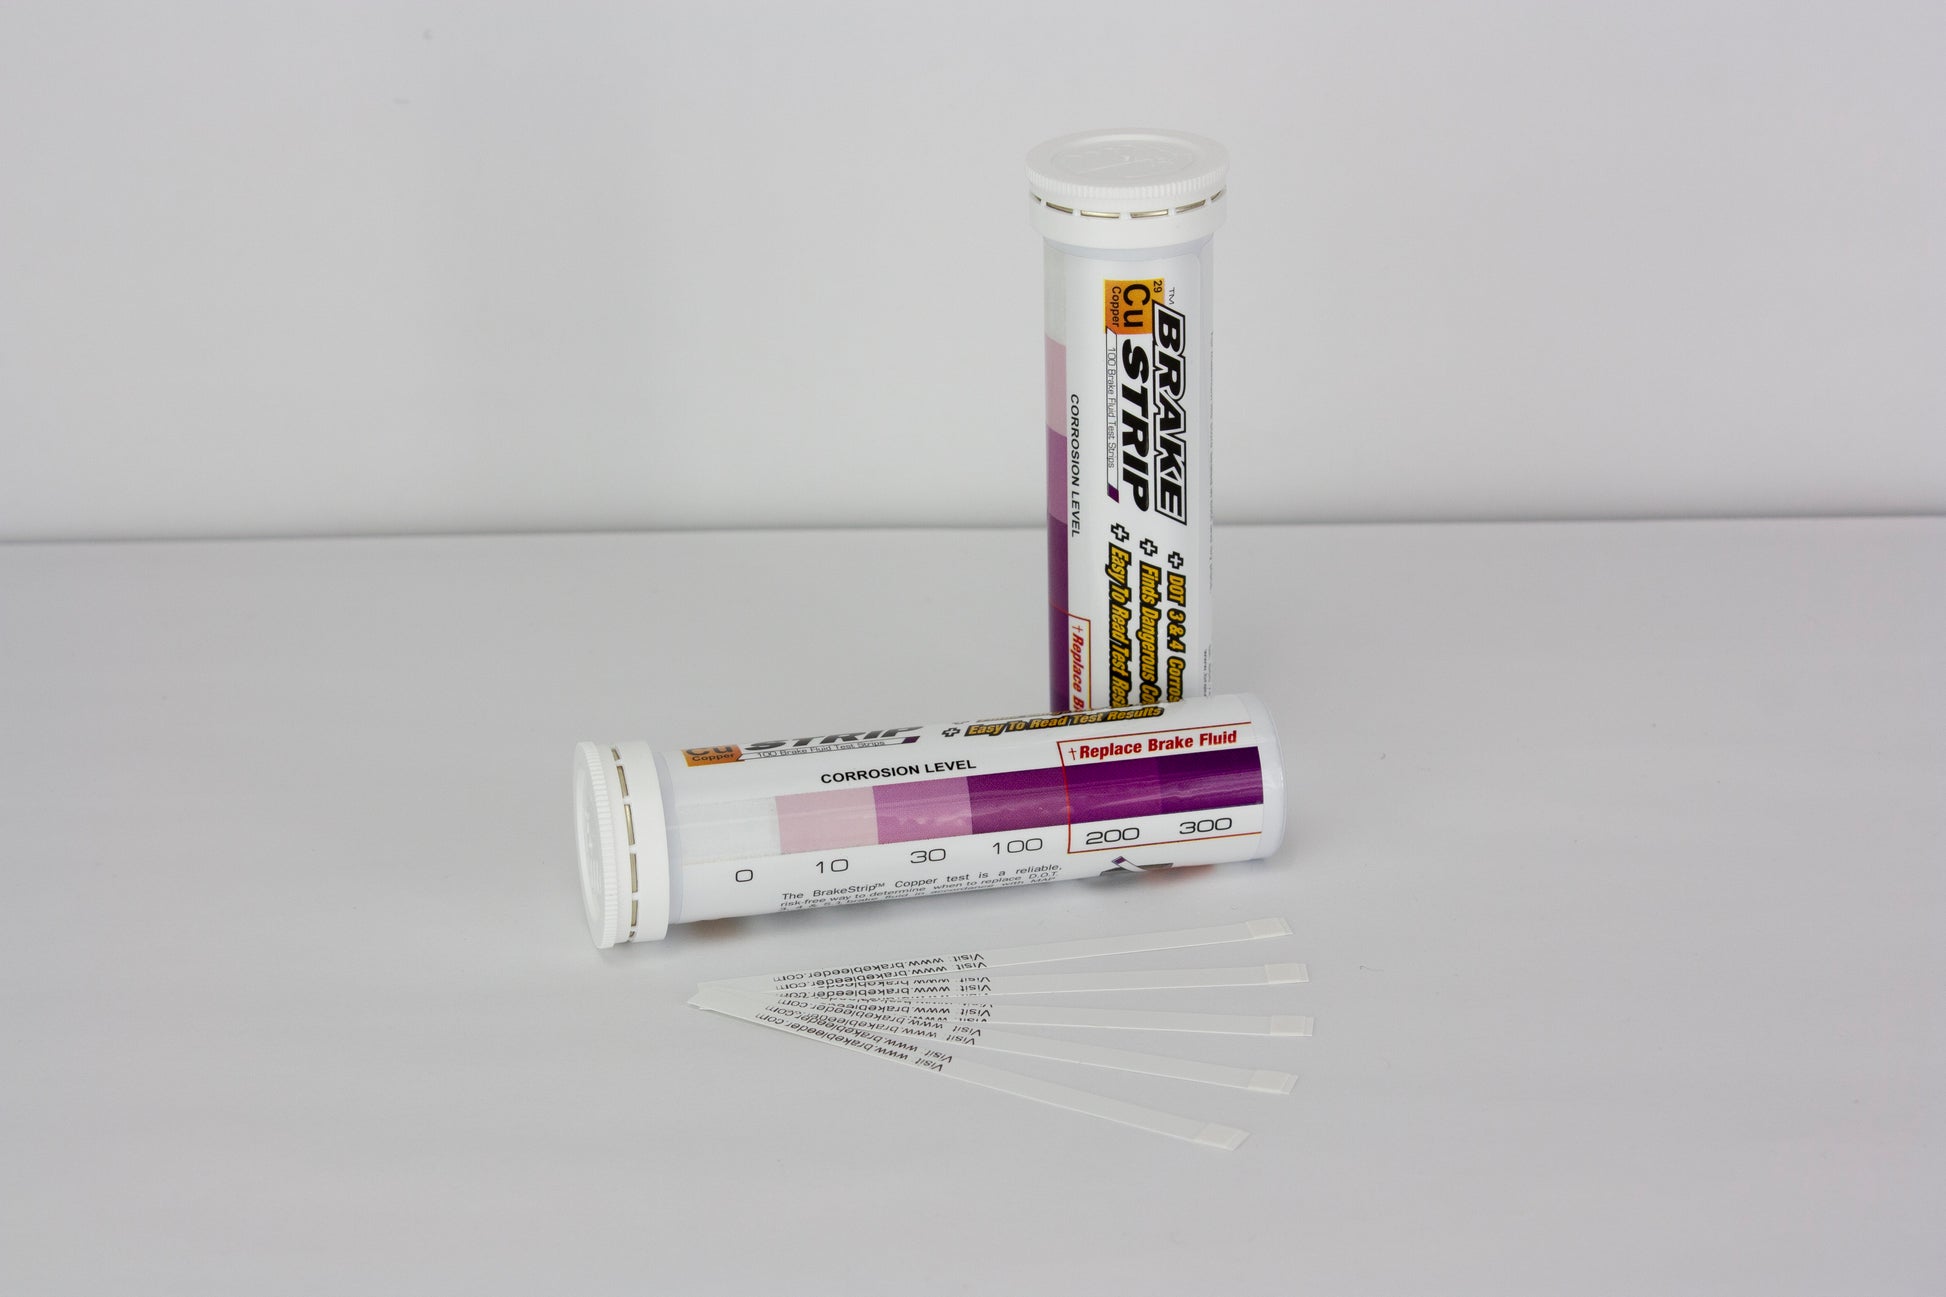 The image shows two tubes of Brake Fluid Test Strips sitting on a table. The text on the tubes is appears to be a label for the product and instructions on how to use the test strips. There is also a chart that indicates a range of corrosion levels.